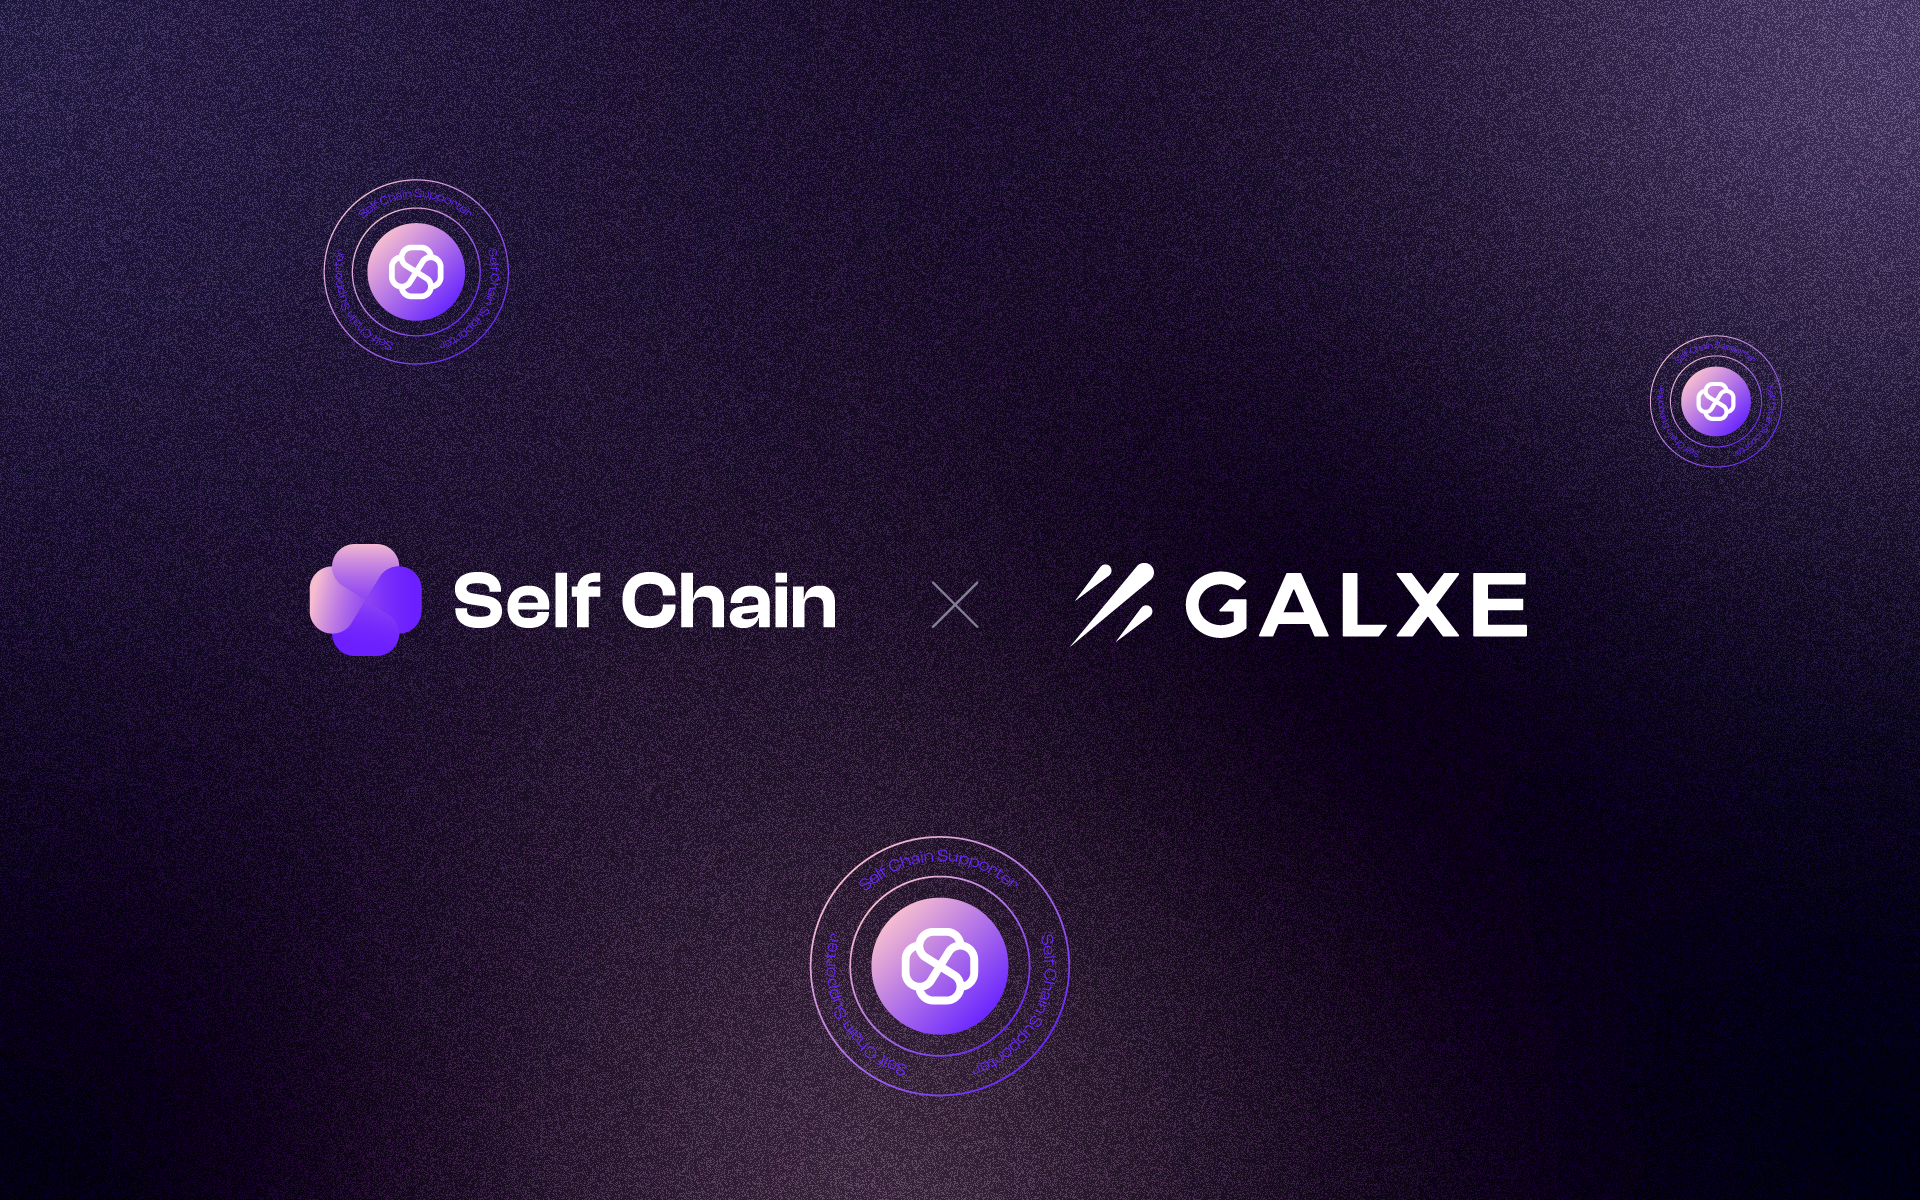 Unlock Exciting Opportunities with Self Chain: Join Our Galxe Campaign and Earn Self Chain Supporter NFTs!